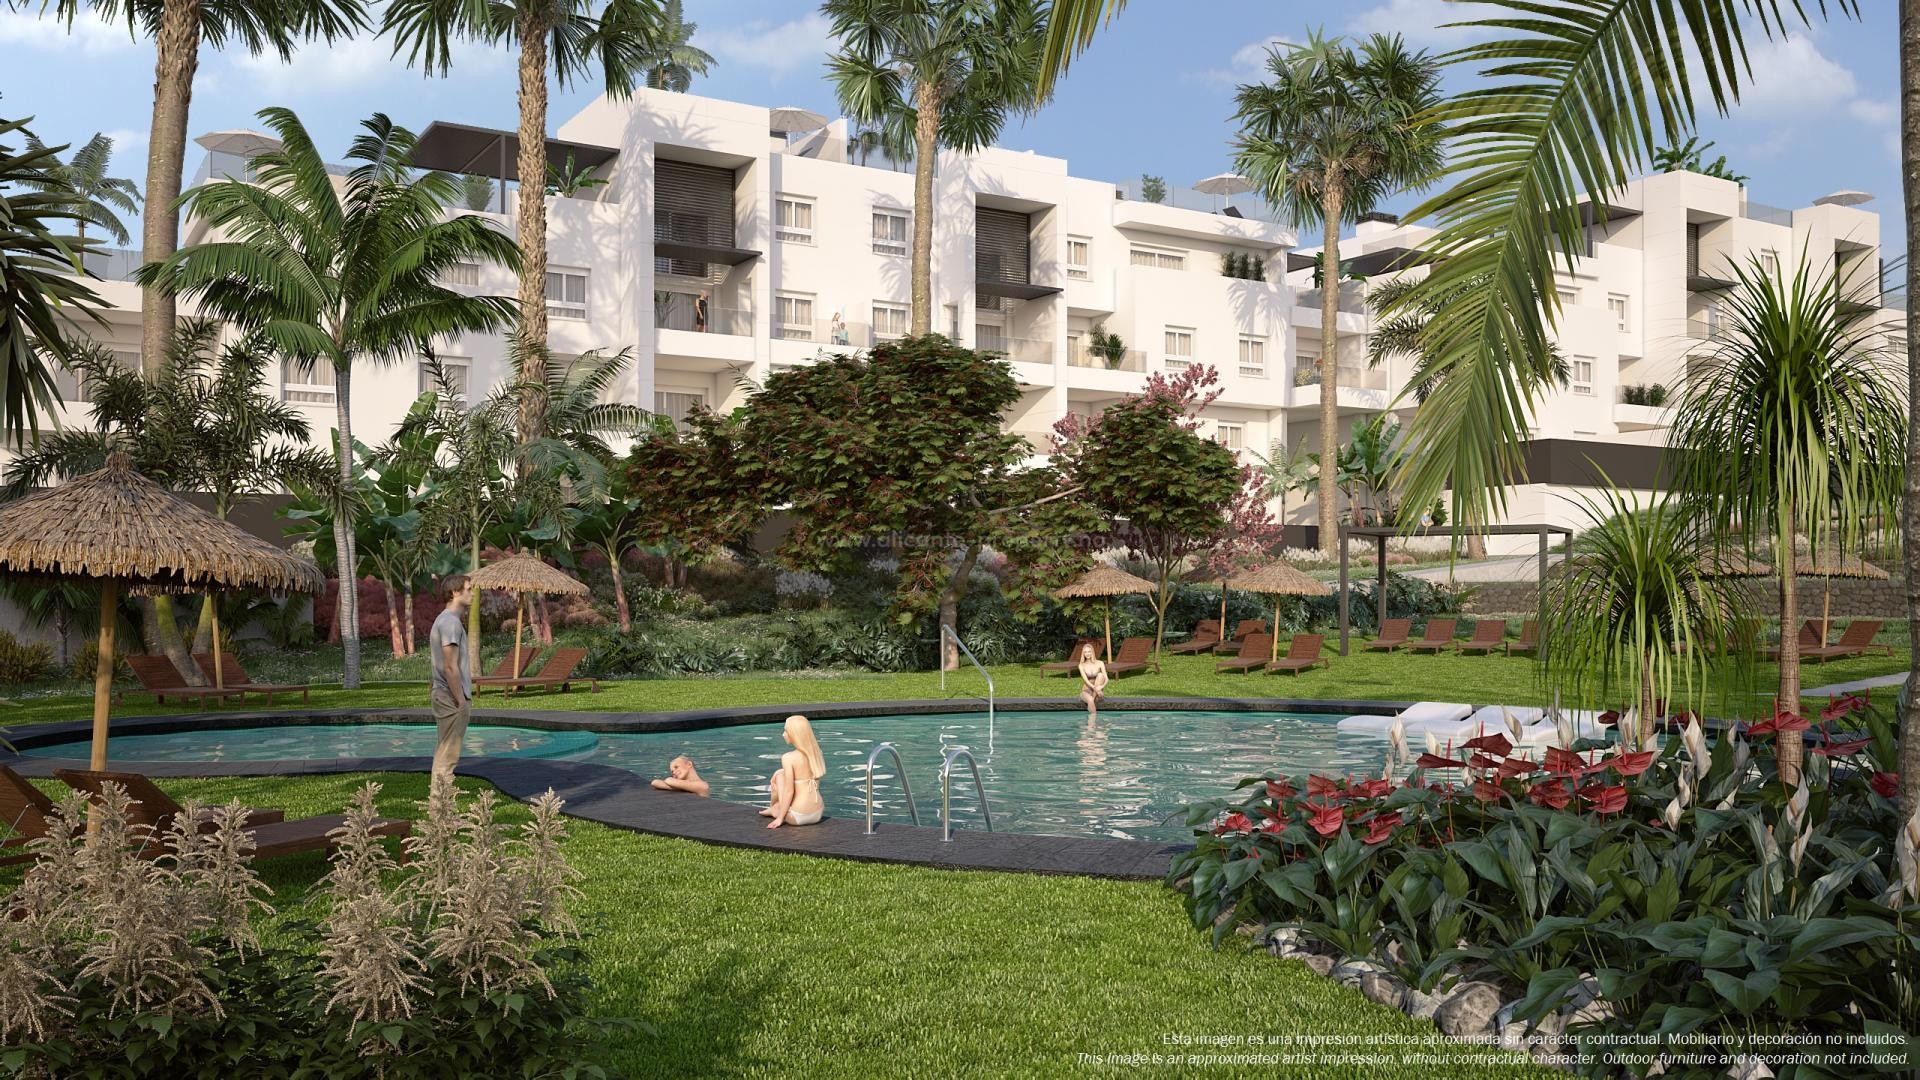 The homes in Punta Prima consist of apartments with 2 and 3 bedrooms, 2 bathrooms, terraces, two original swimming pools equipped with sunbeds